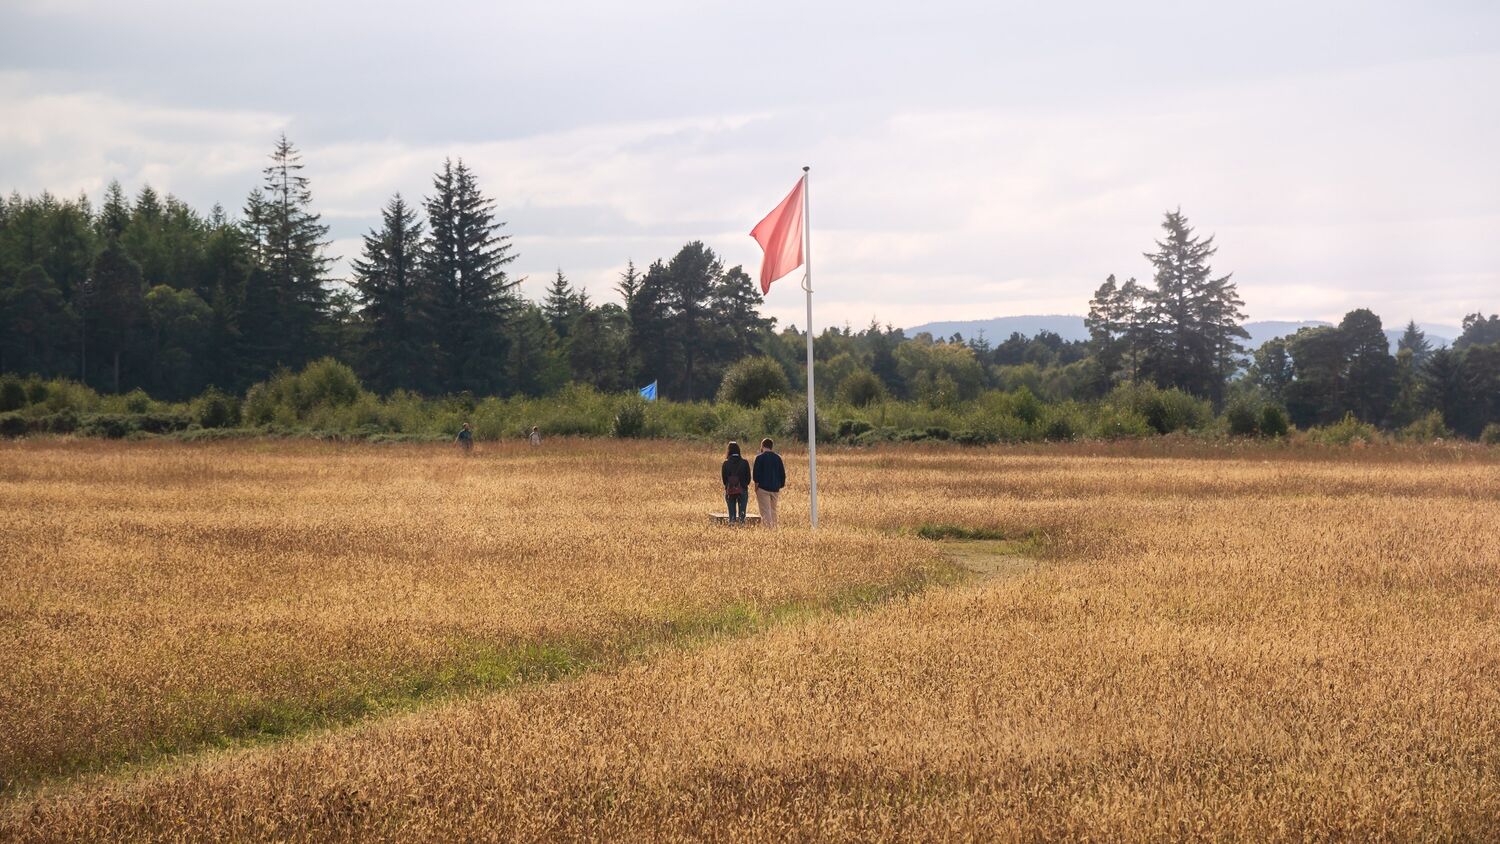 A couple stand on Culloden Battlefield beneath a tall flagpole from which flies a red flag. Woodland can be seen at the side of the field.